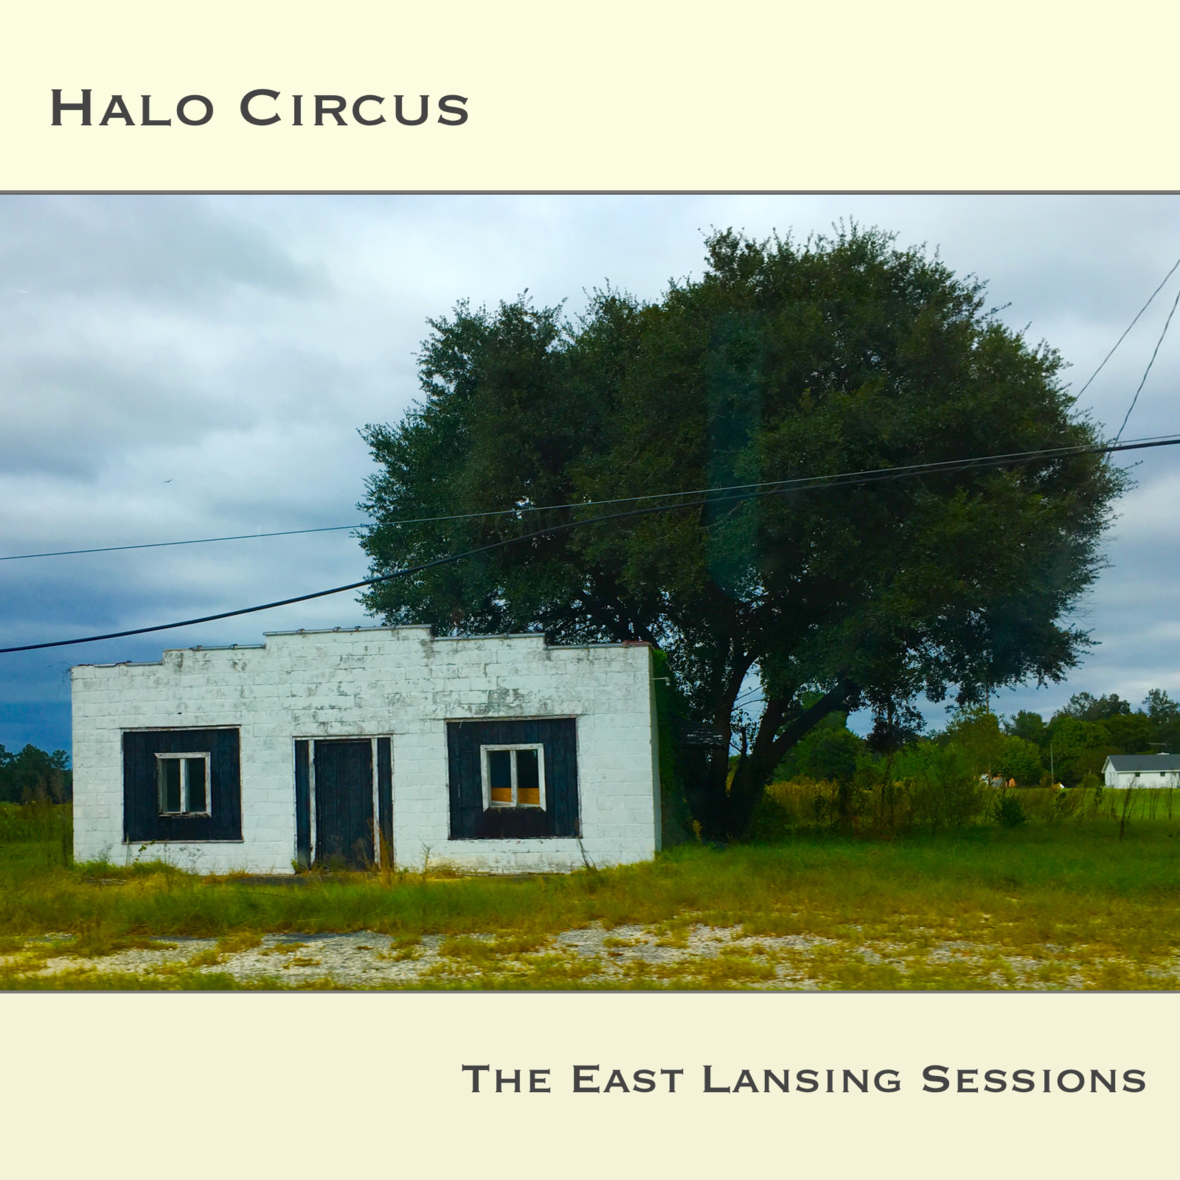 Halo Circus - The East Lansing Sessions EP - Official Cover